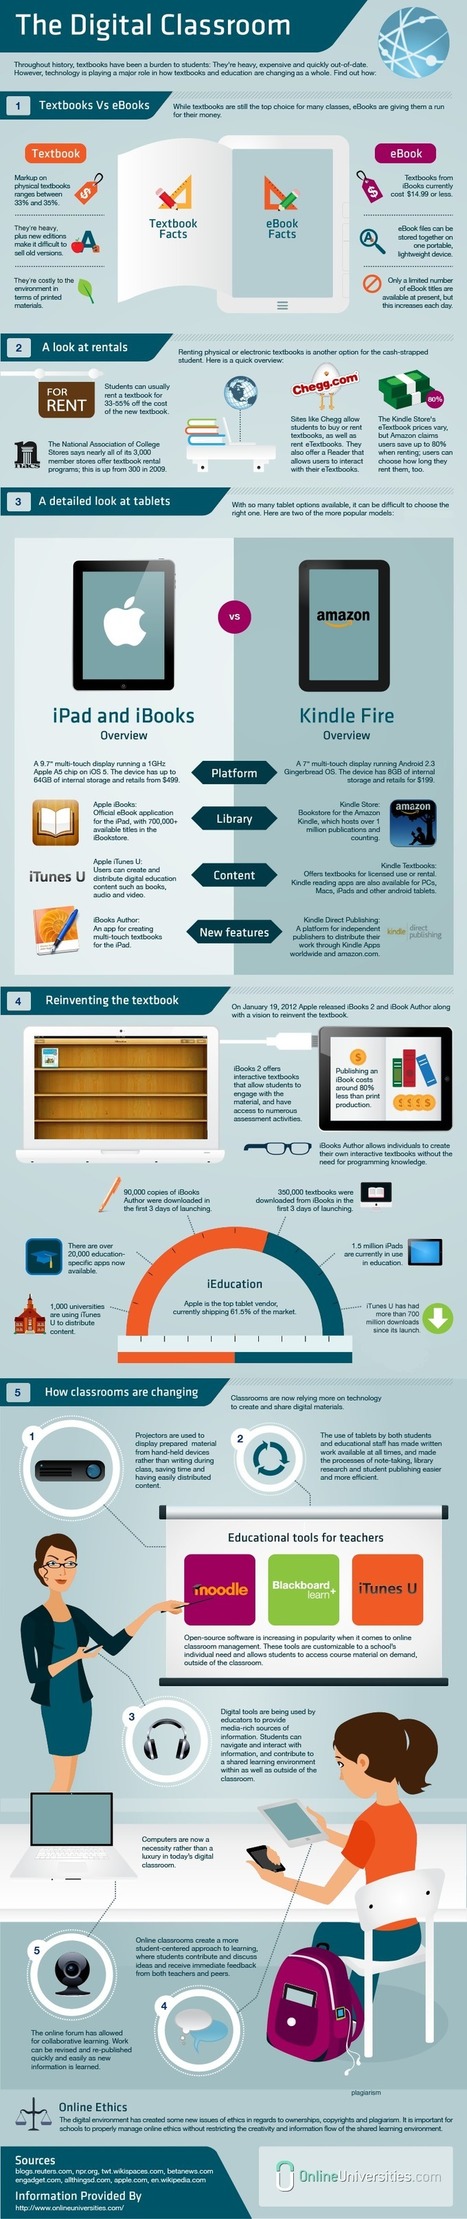 The Elements Of A Digital Classroom [Infographic] | MarketingHits | Scoop.it